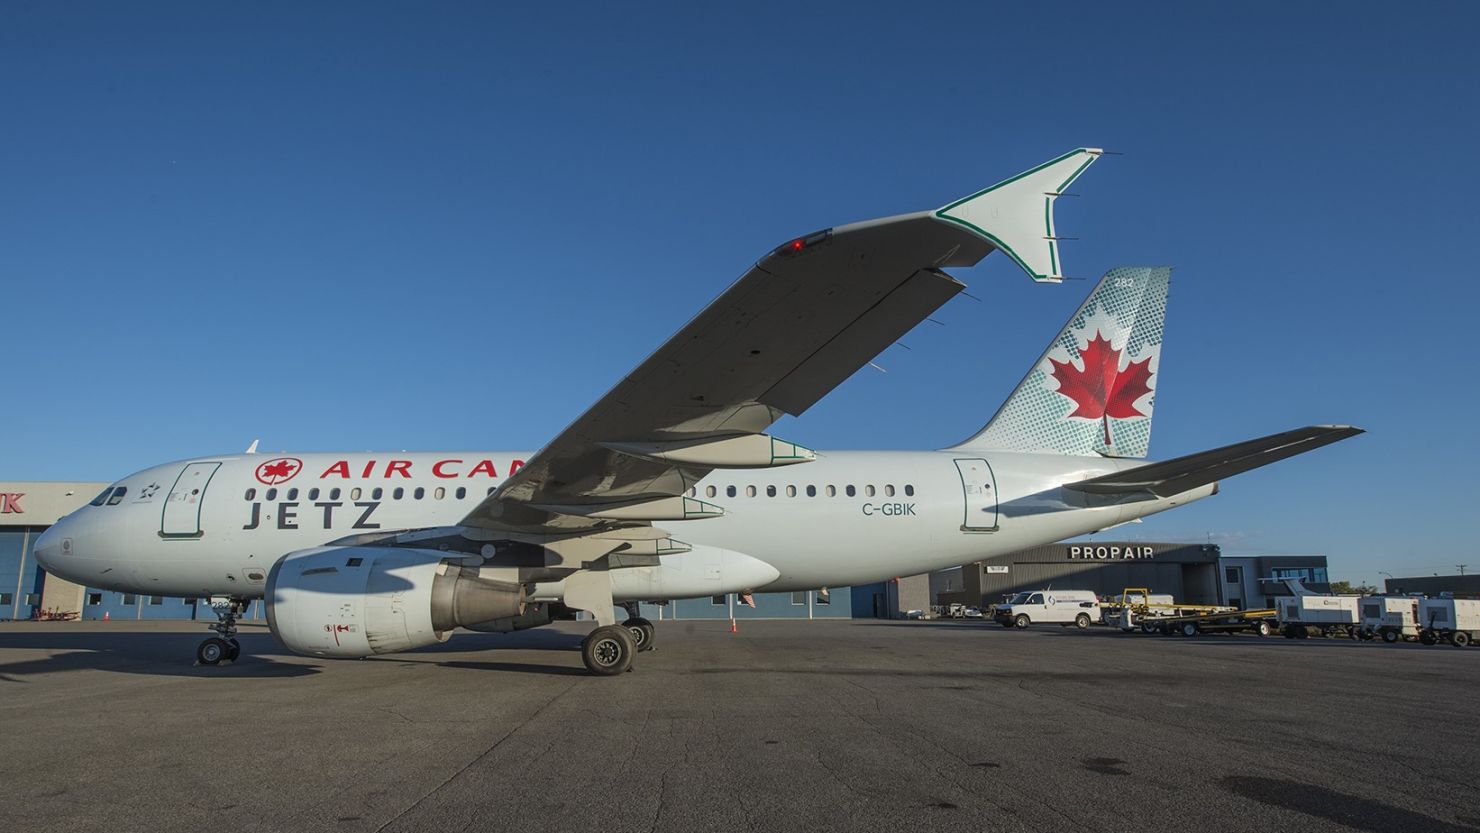 Air Canada is making its charter Jetz aircraft available for commercial flights